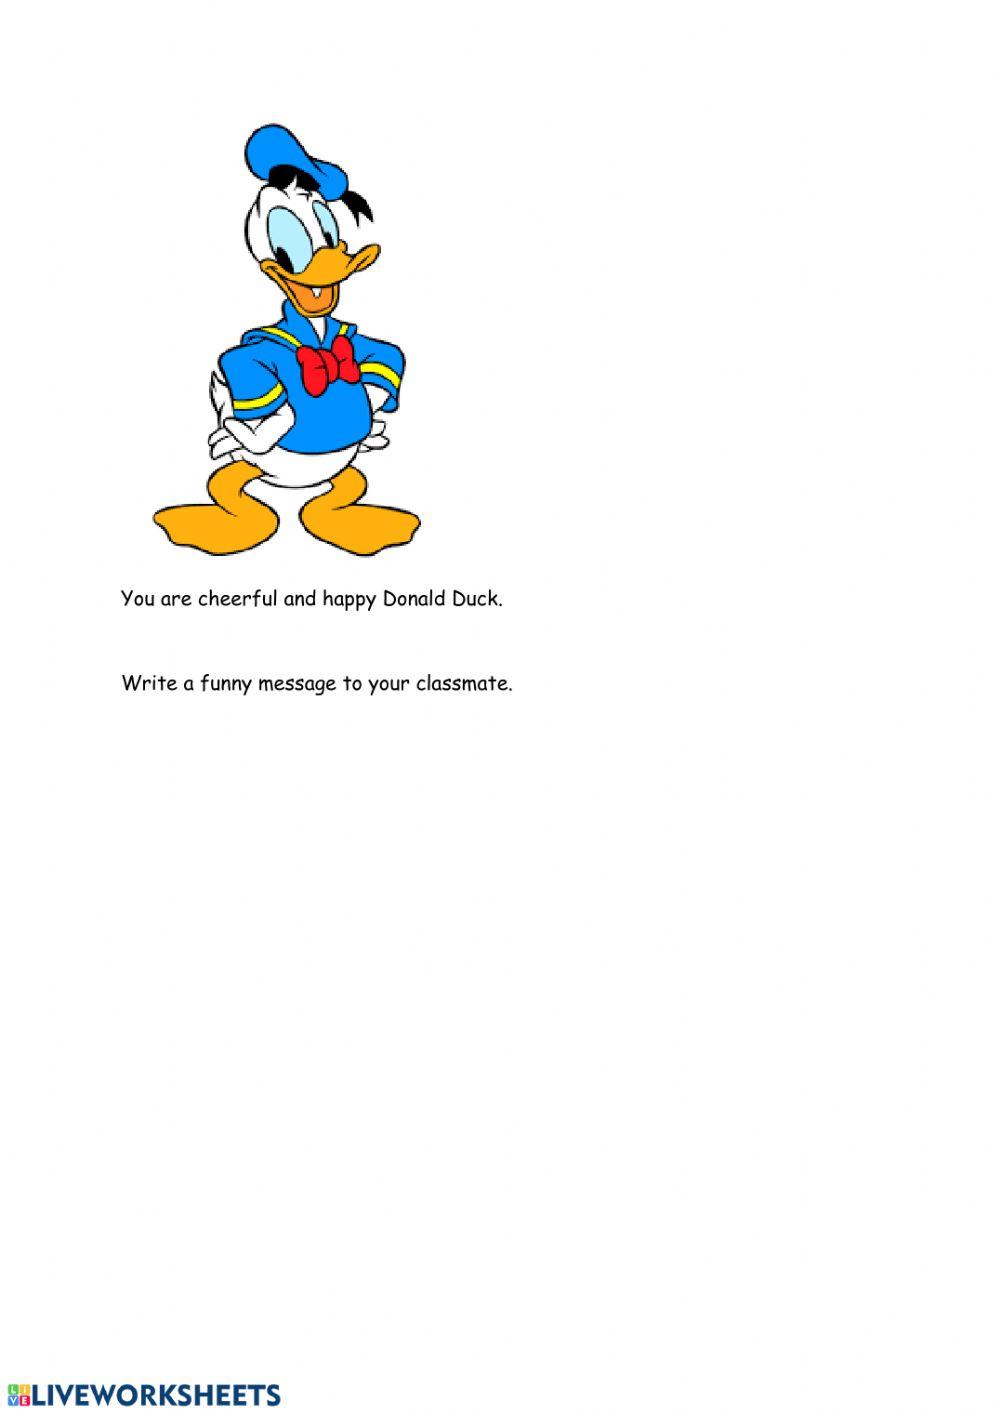 A message from Donald Duck